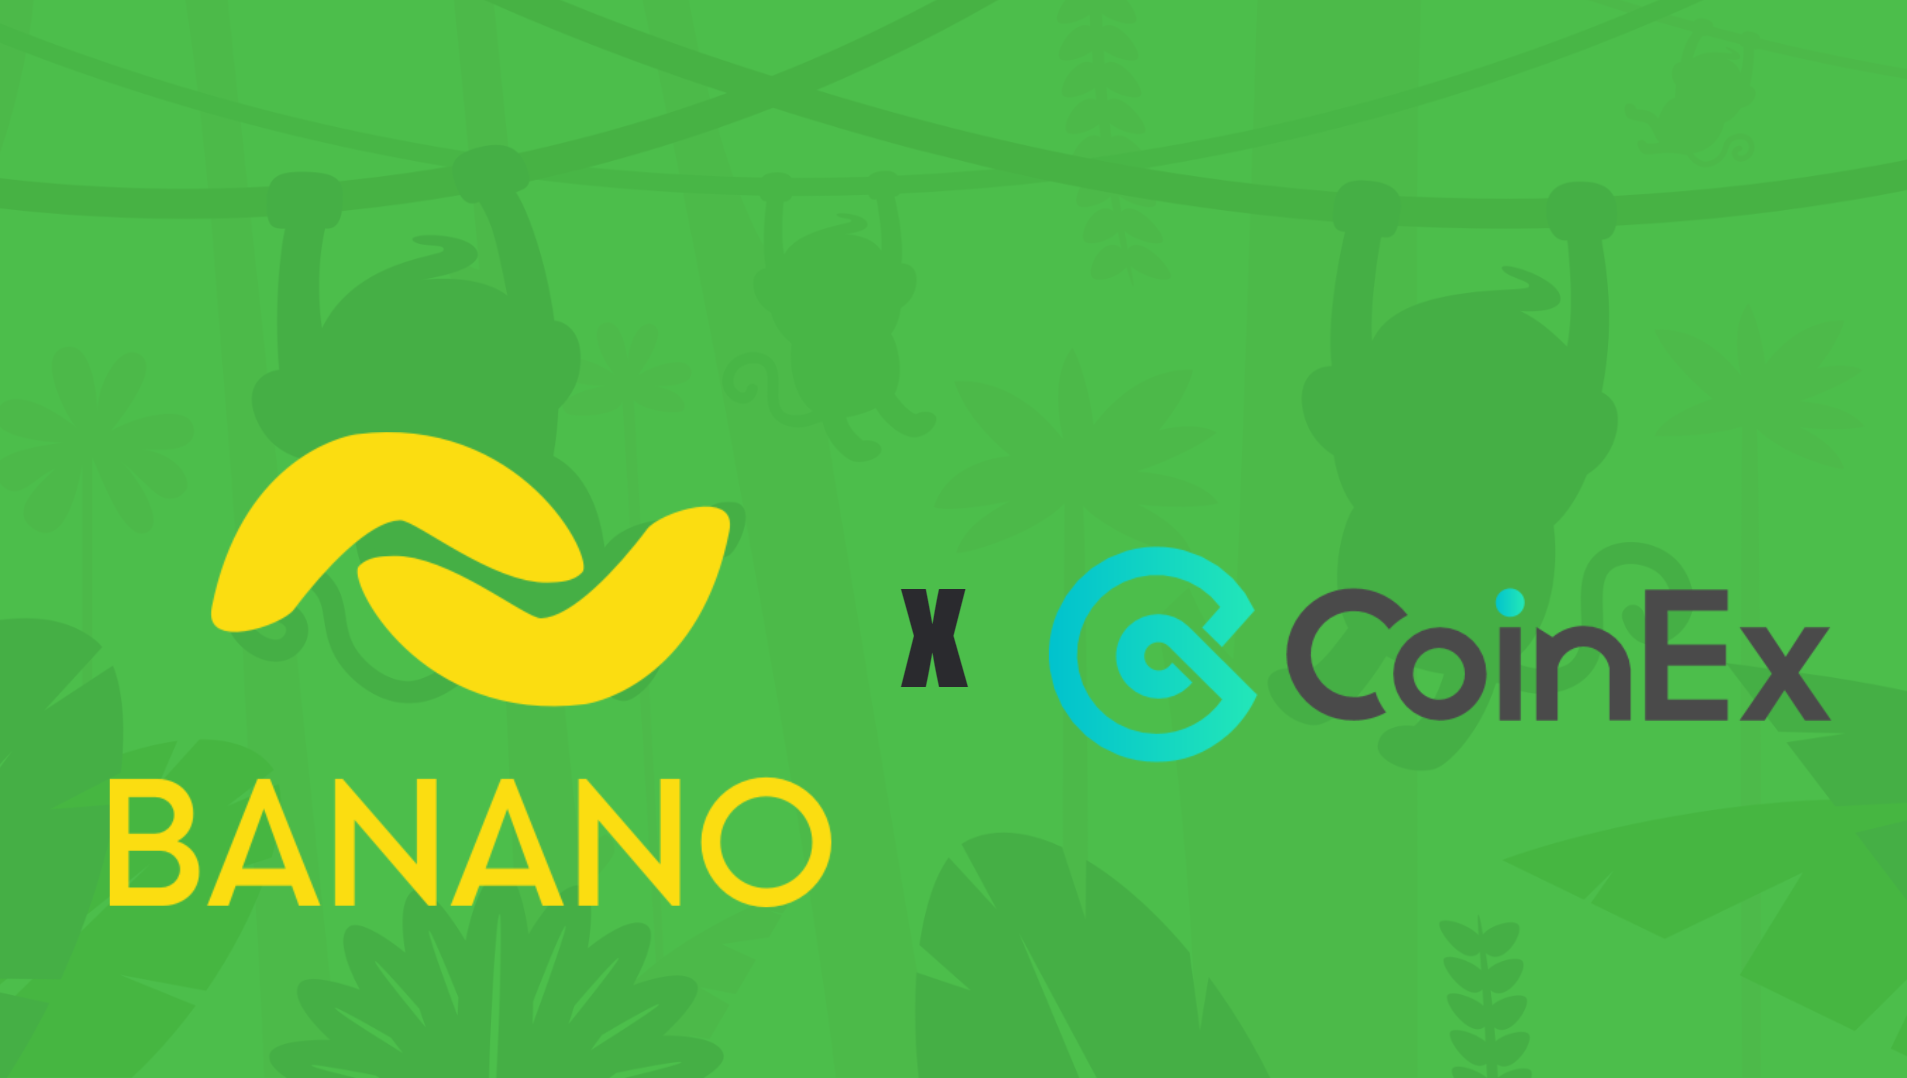 BANANO is now on CoinEx Exchange!